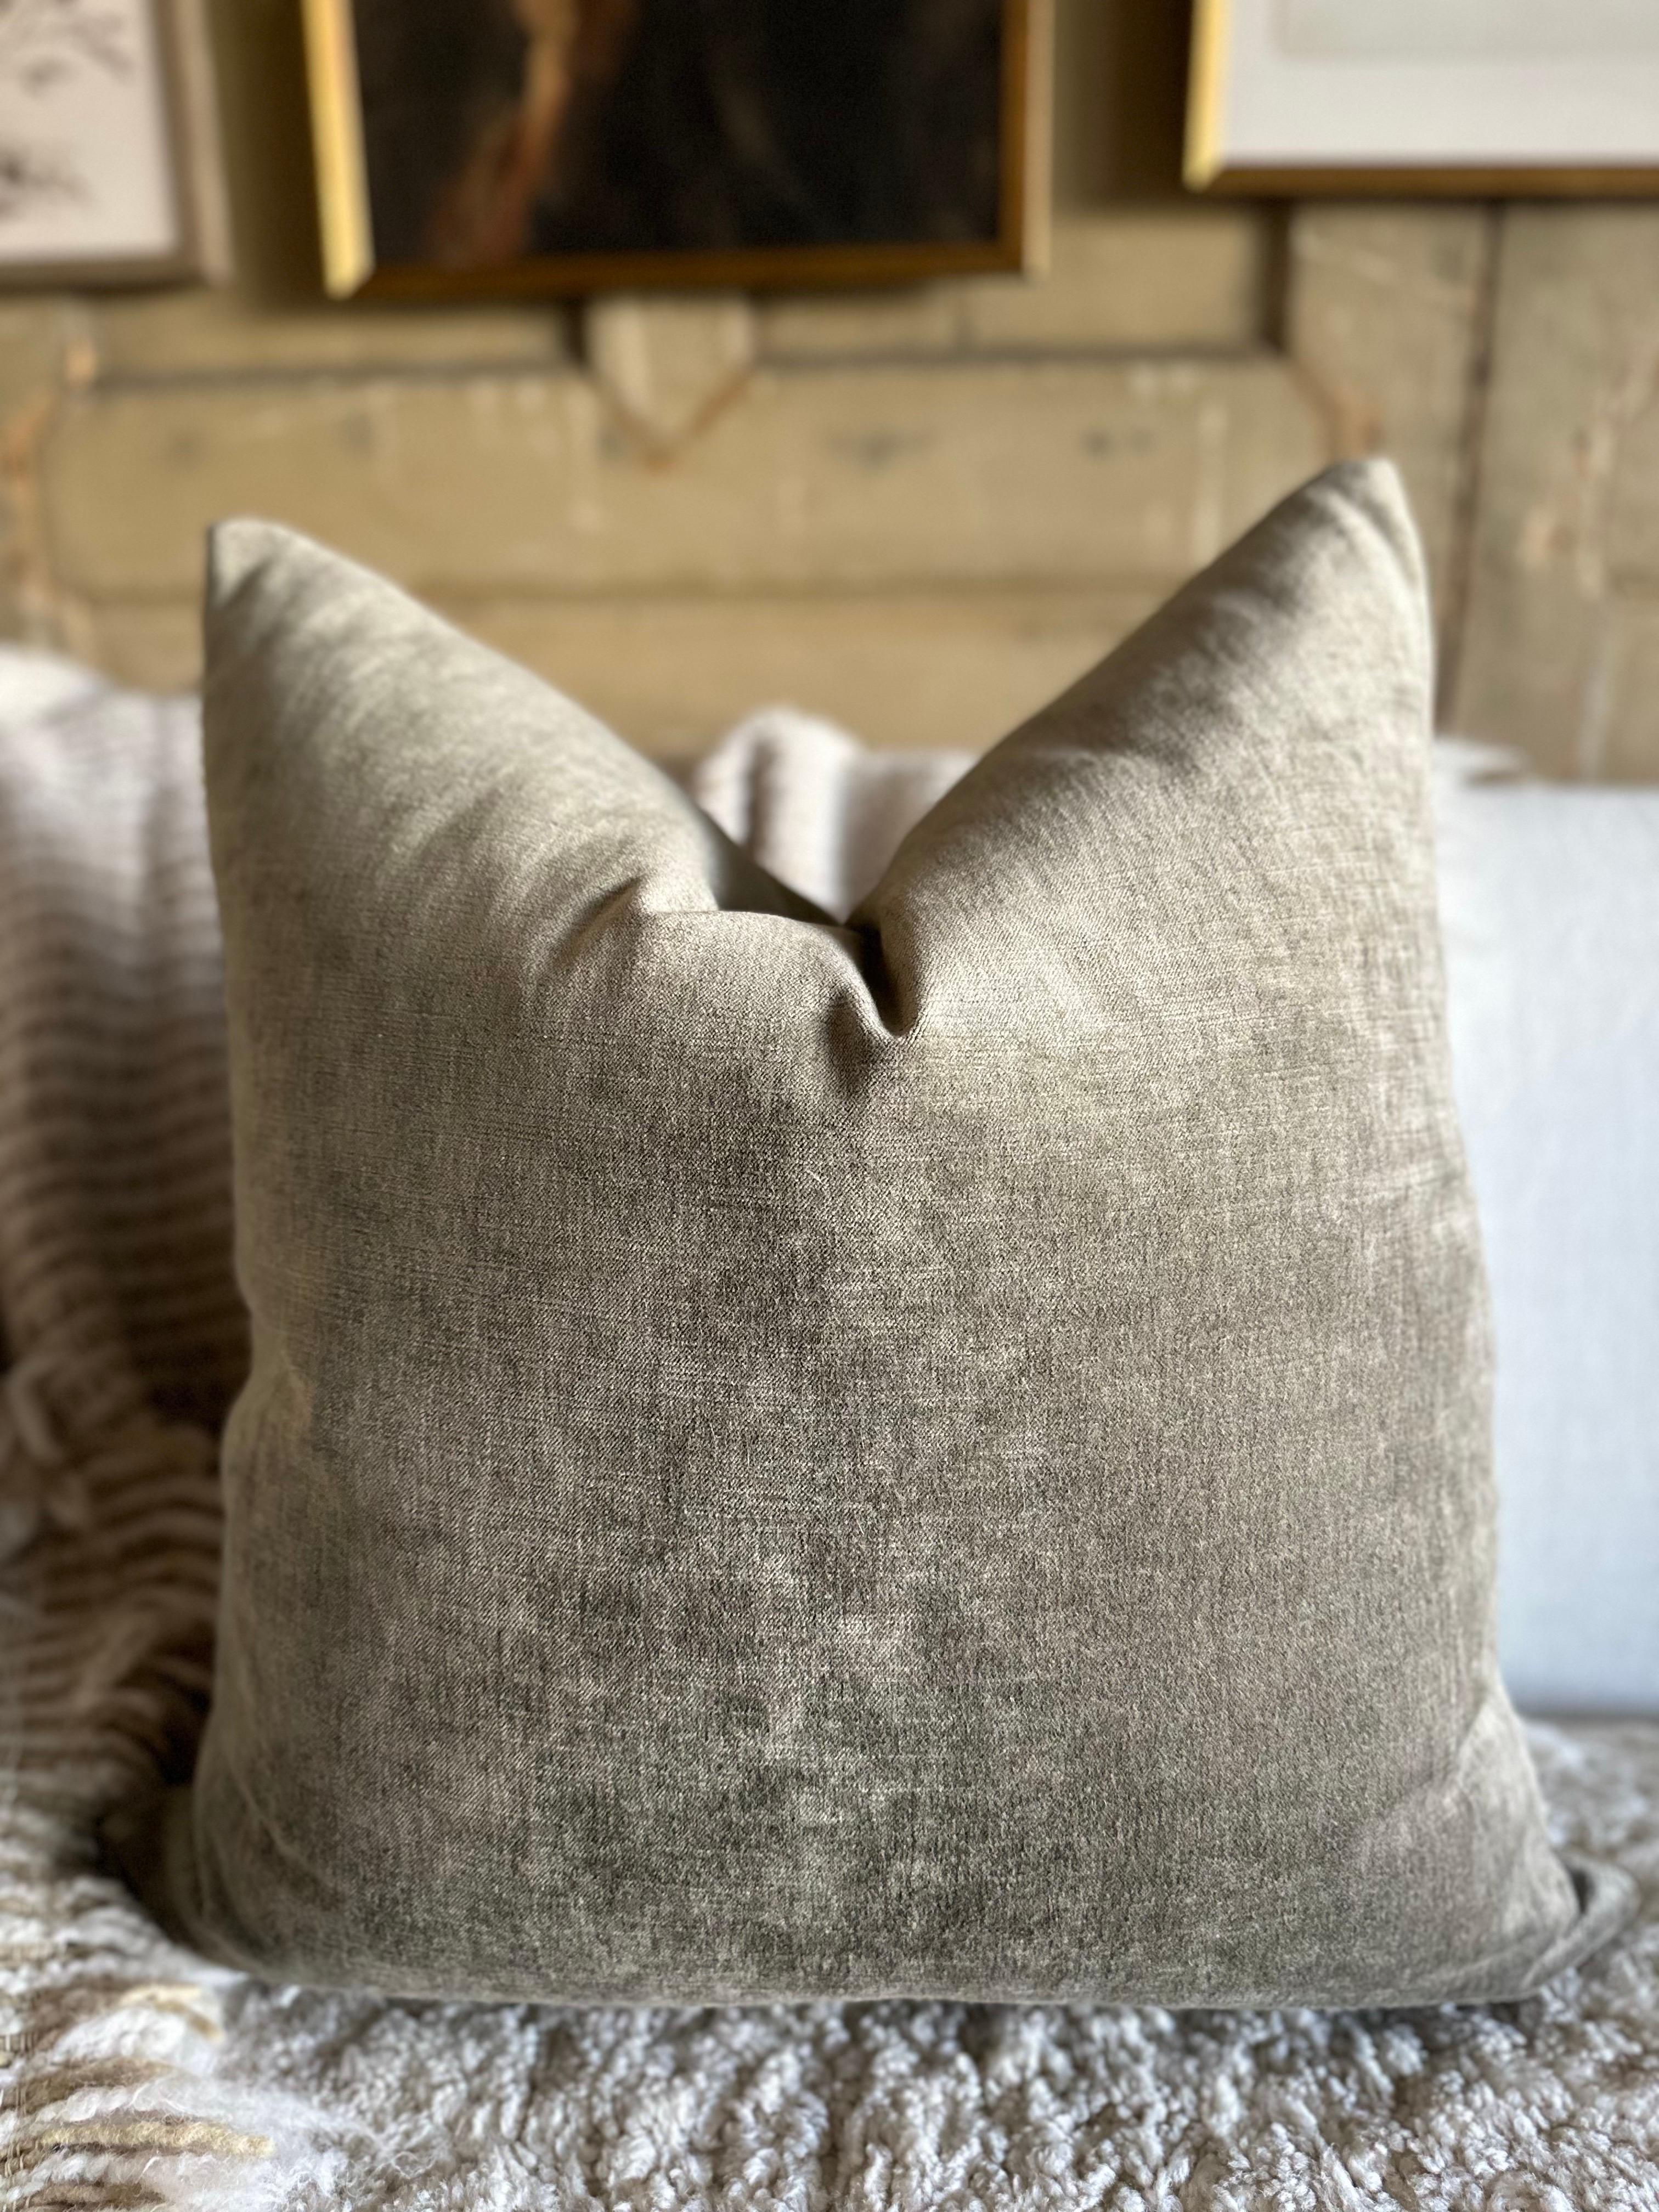 A luxurious Royal Velvet face with stone washed linen back.
Linen & Velvet fabric is imported from France.
Custom made to order, can be customized to your size.
Color: Kaki
Antique brass zipper
Size 22x22
Includes Down Feather Insert
Care: Can be